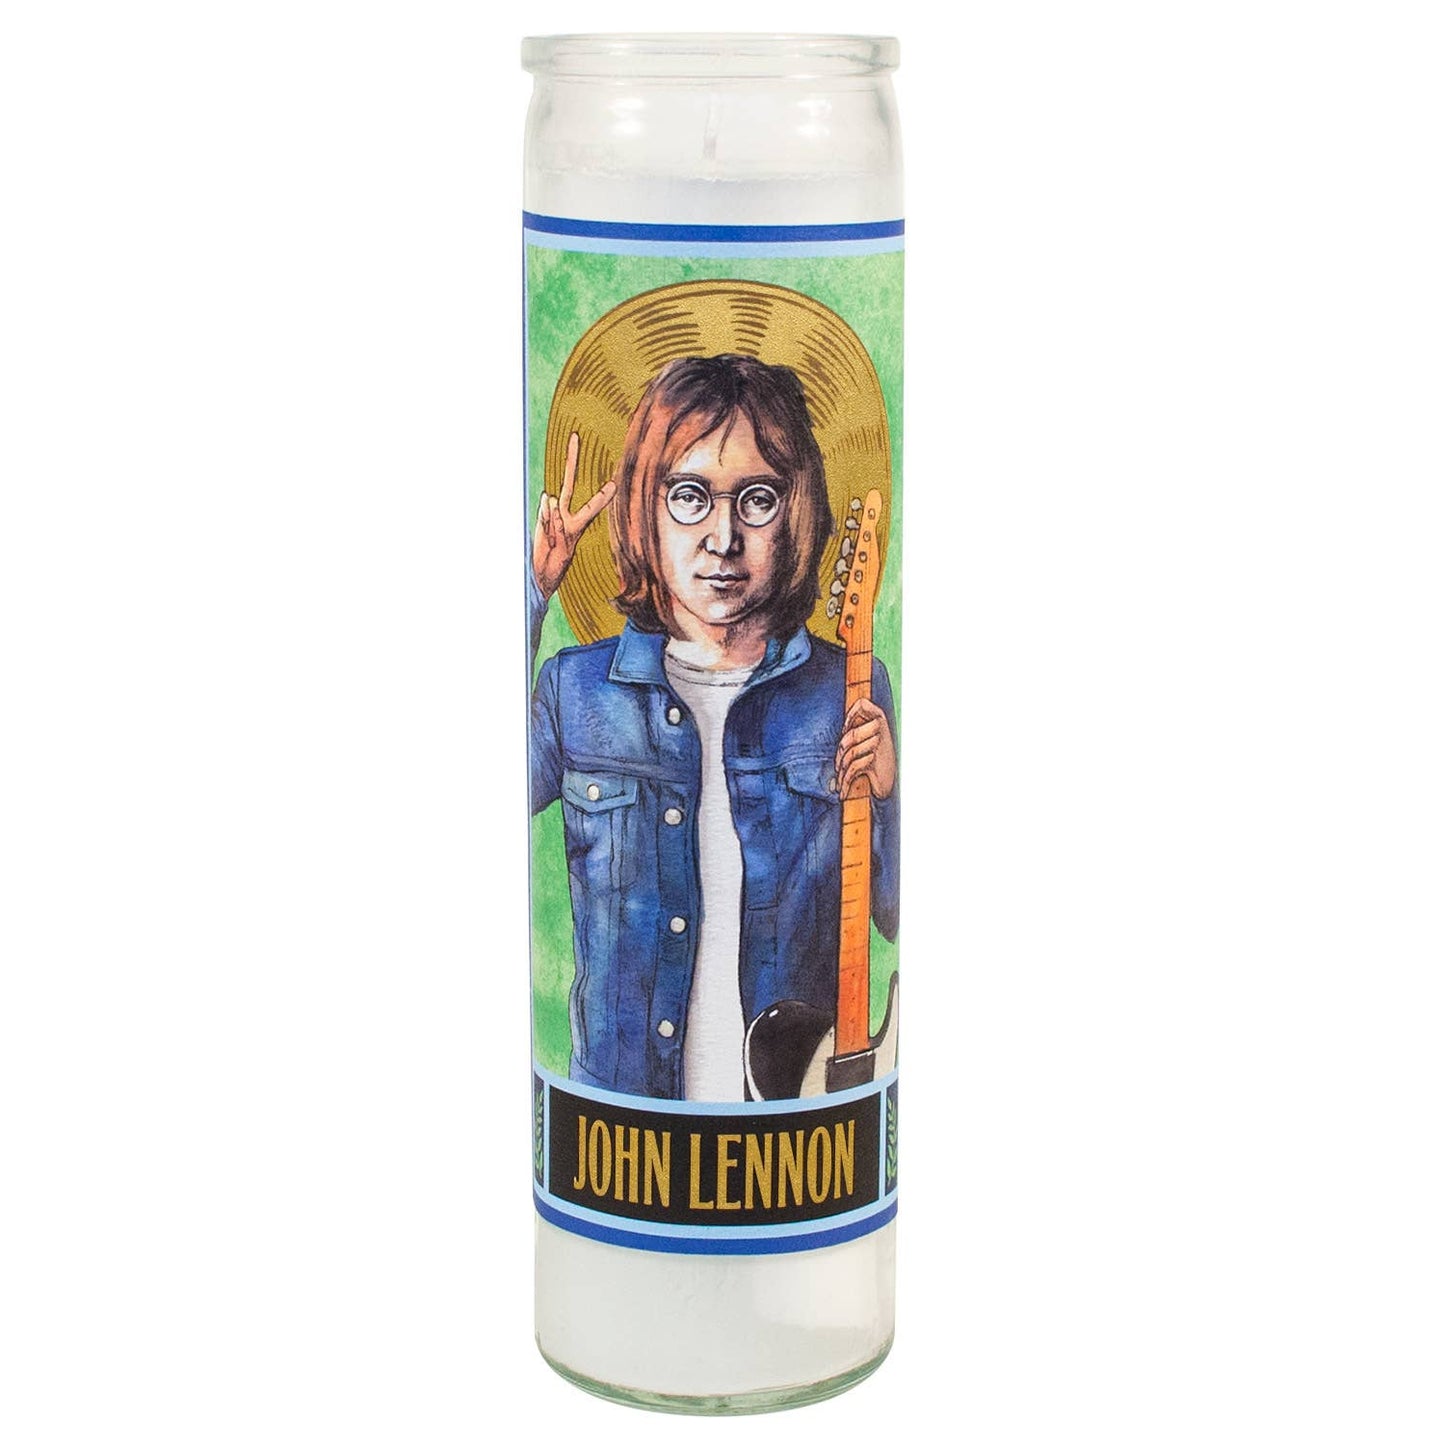 John Lennon Secular Saint Candle from The Unemployed Philosophers Guild